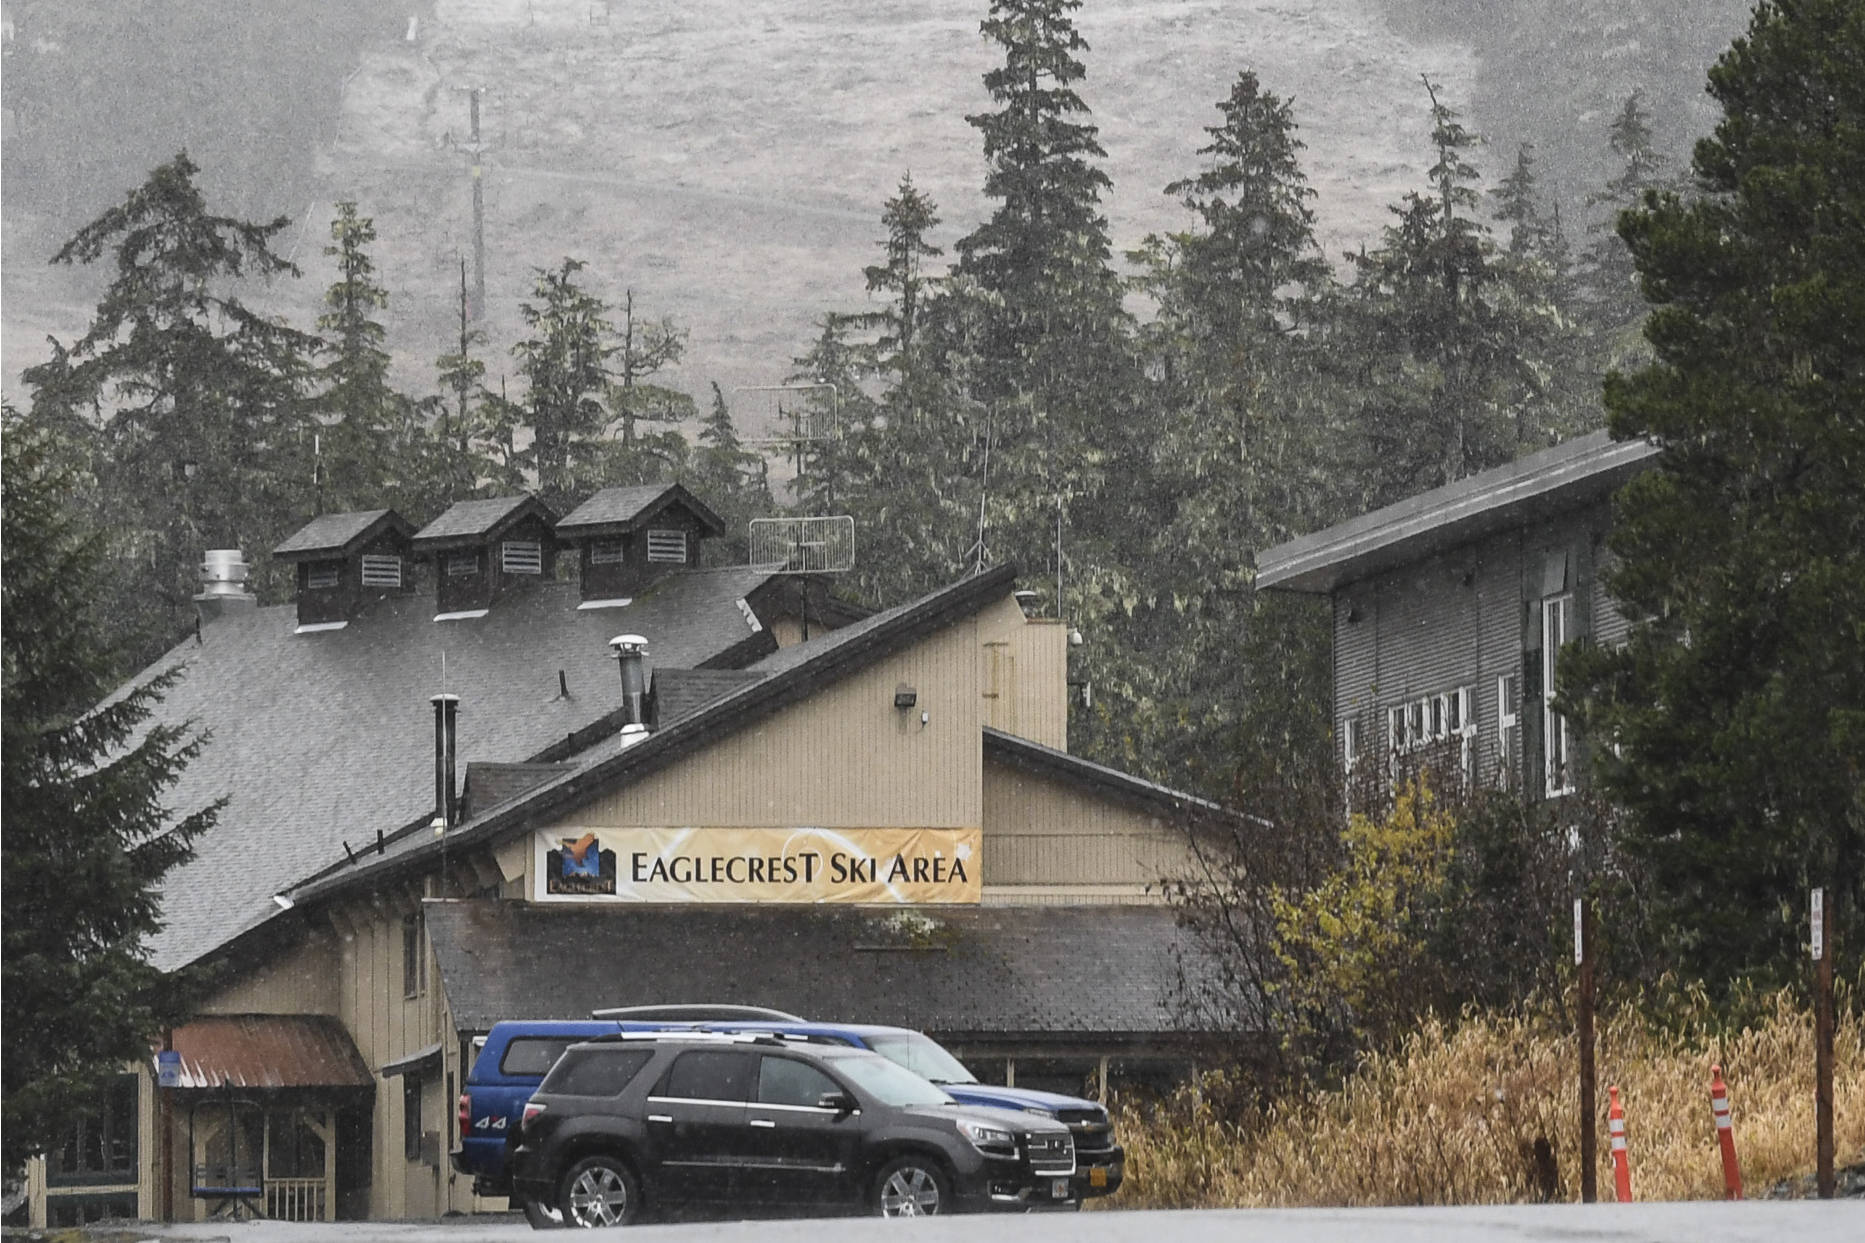 Fresh snow hits the lower slopes at the Eaglecrest Ski Area on Tuesday, Oct. 29, 2019. (Michael Penn | Juneau Empire File)